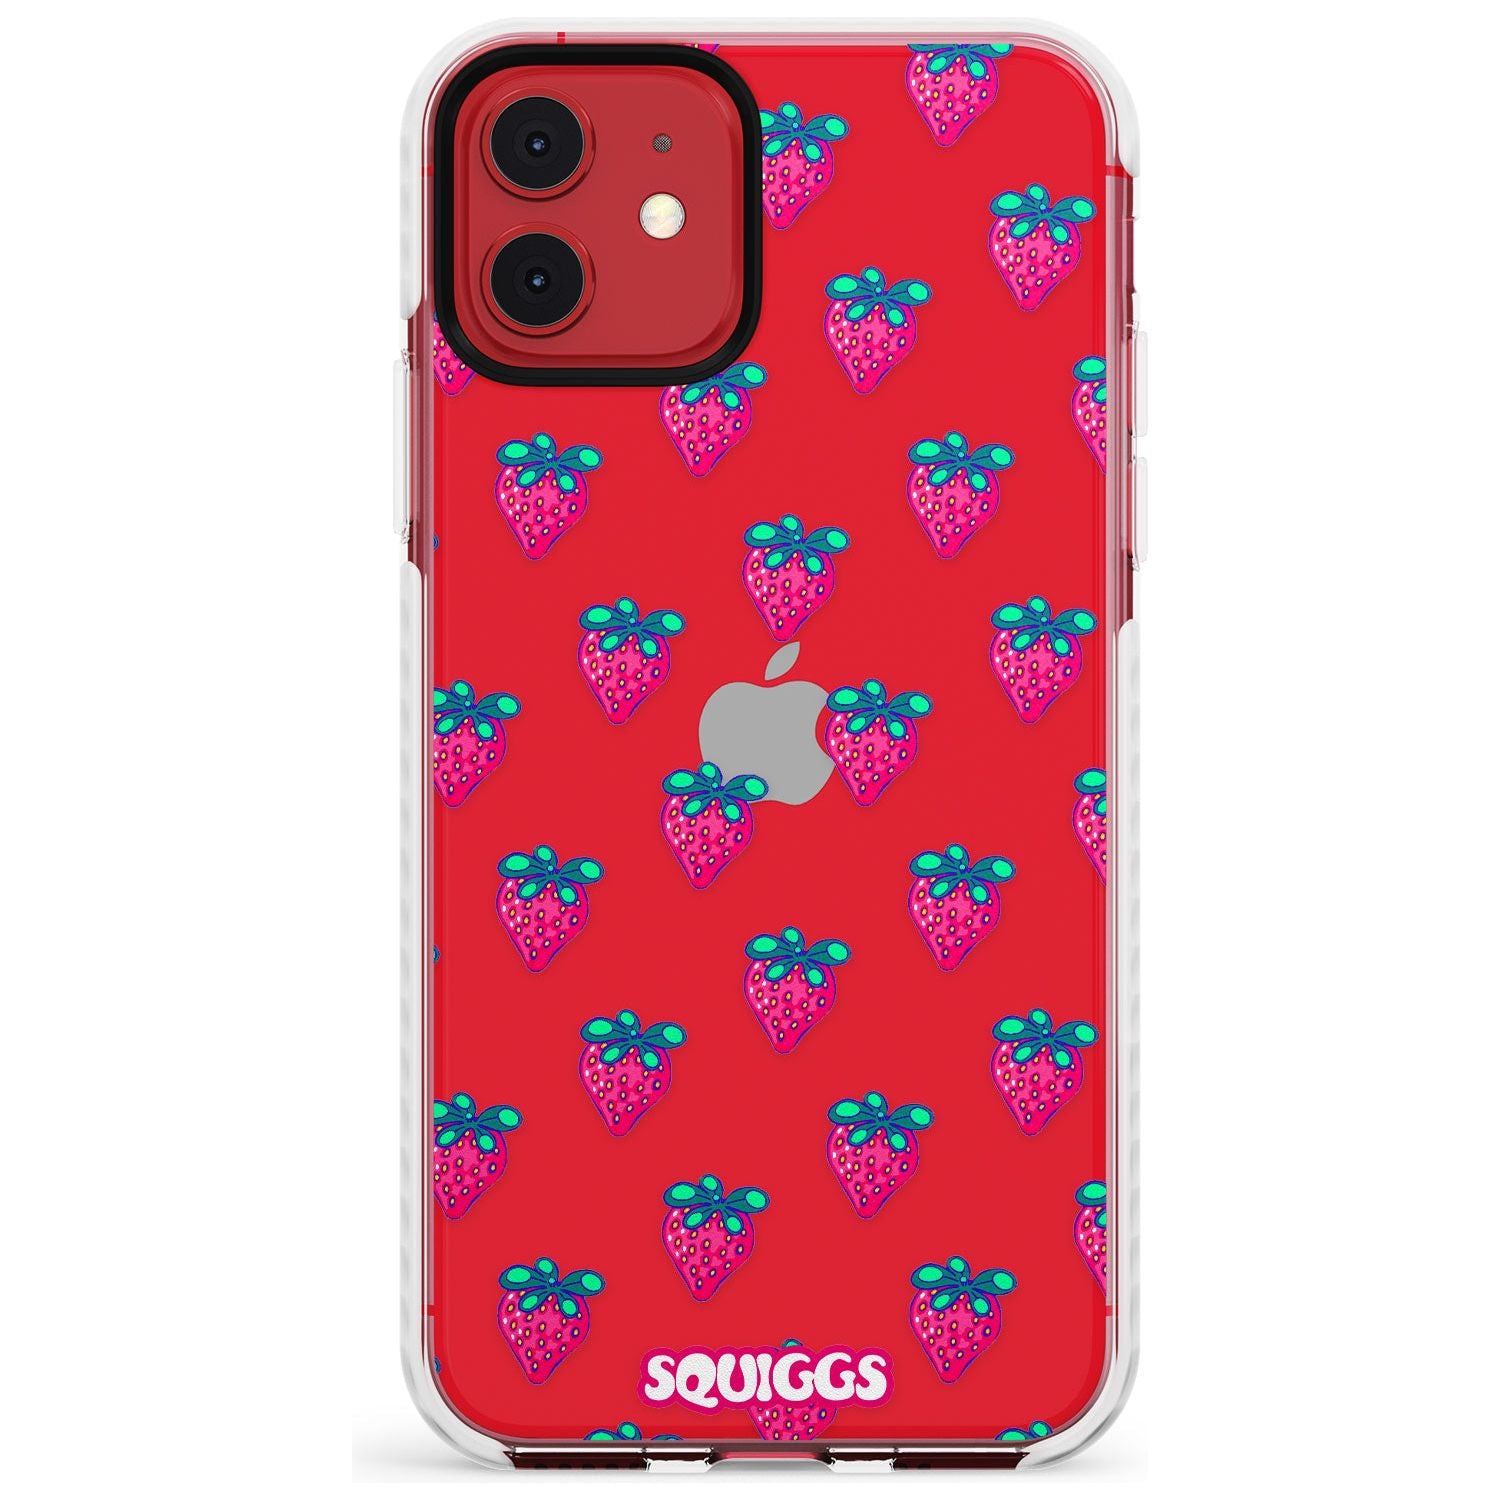 Strawberry Patch Slim TPU Phone Case for iPhone 11